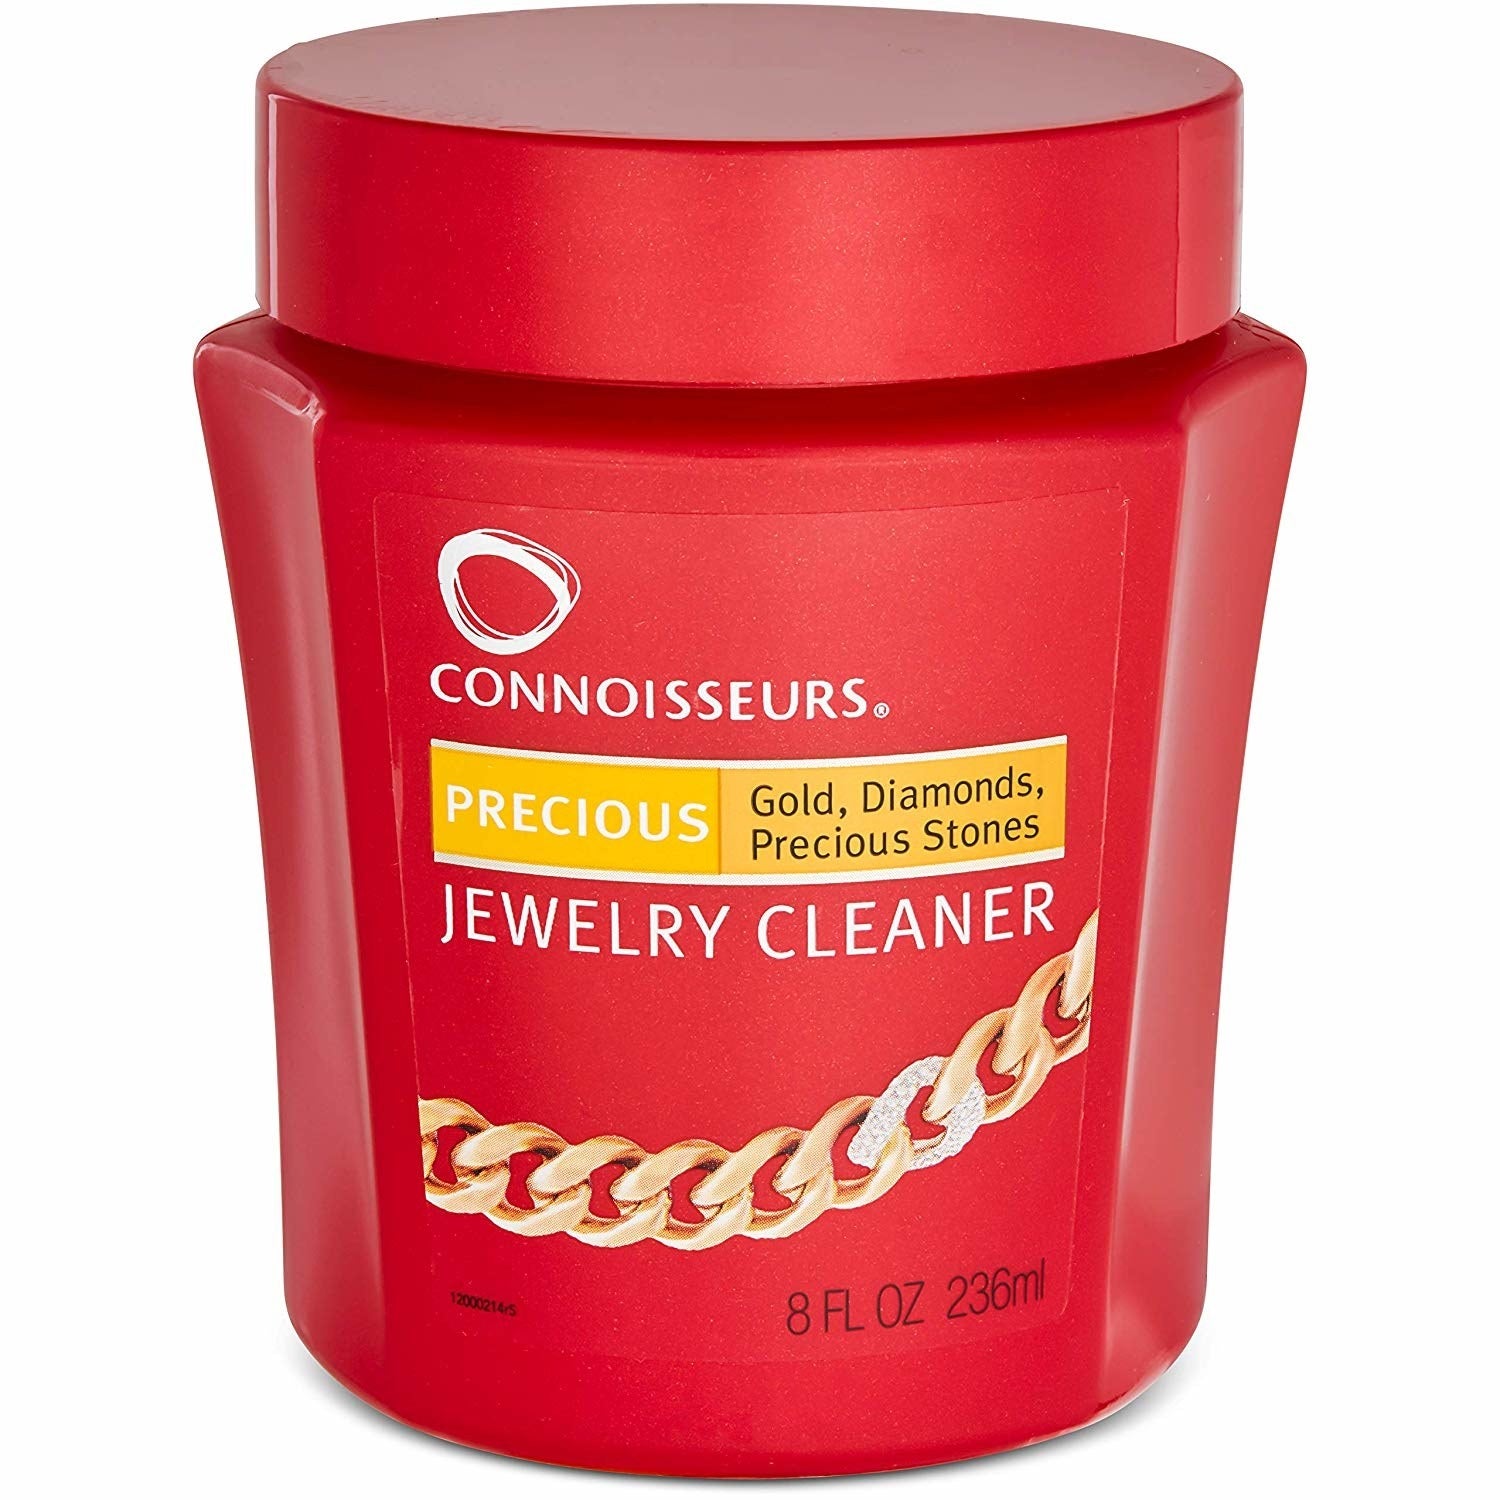 Connoisseurs Precious Jewelry Cleaner : Target